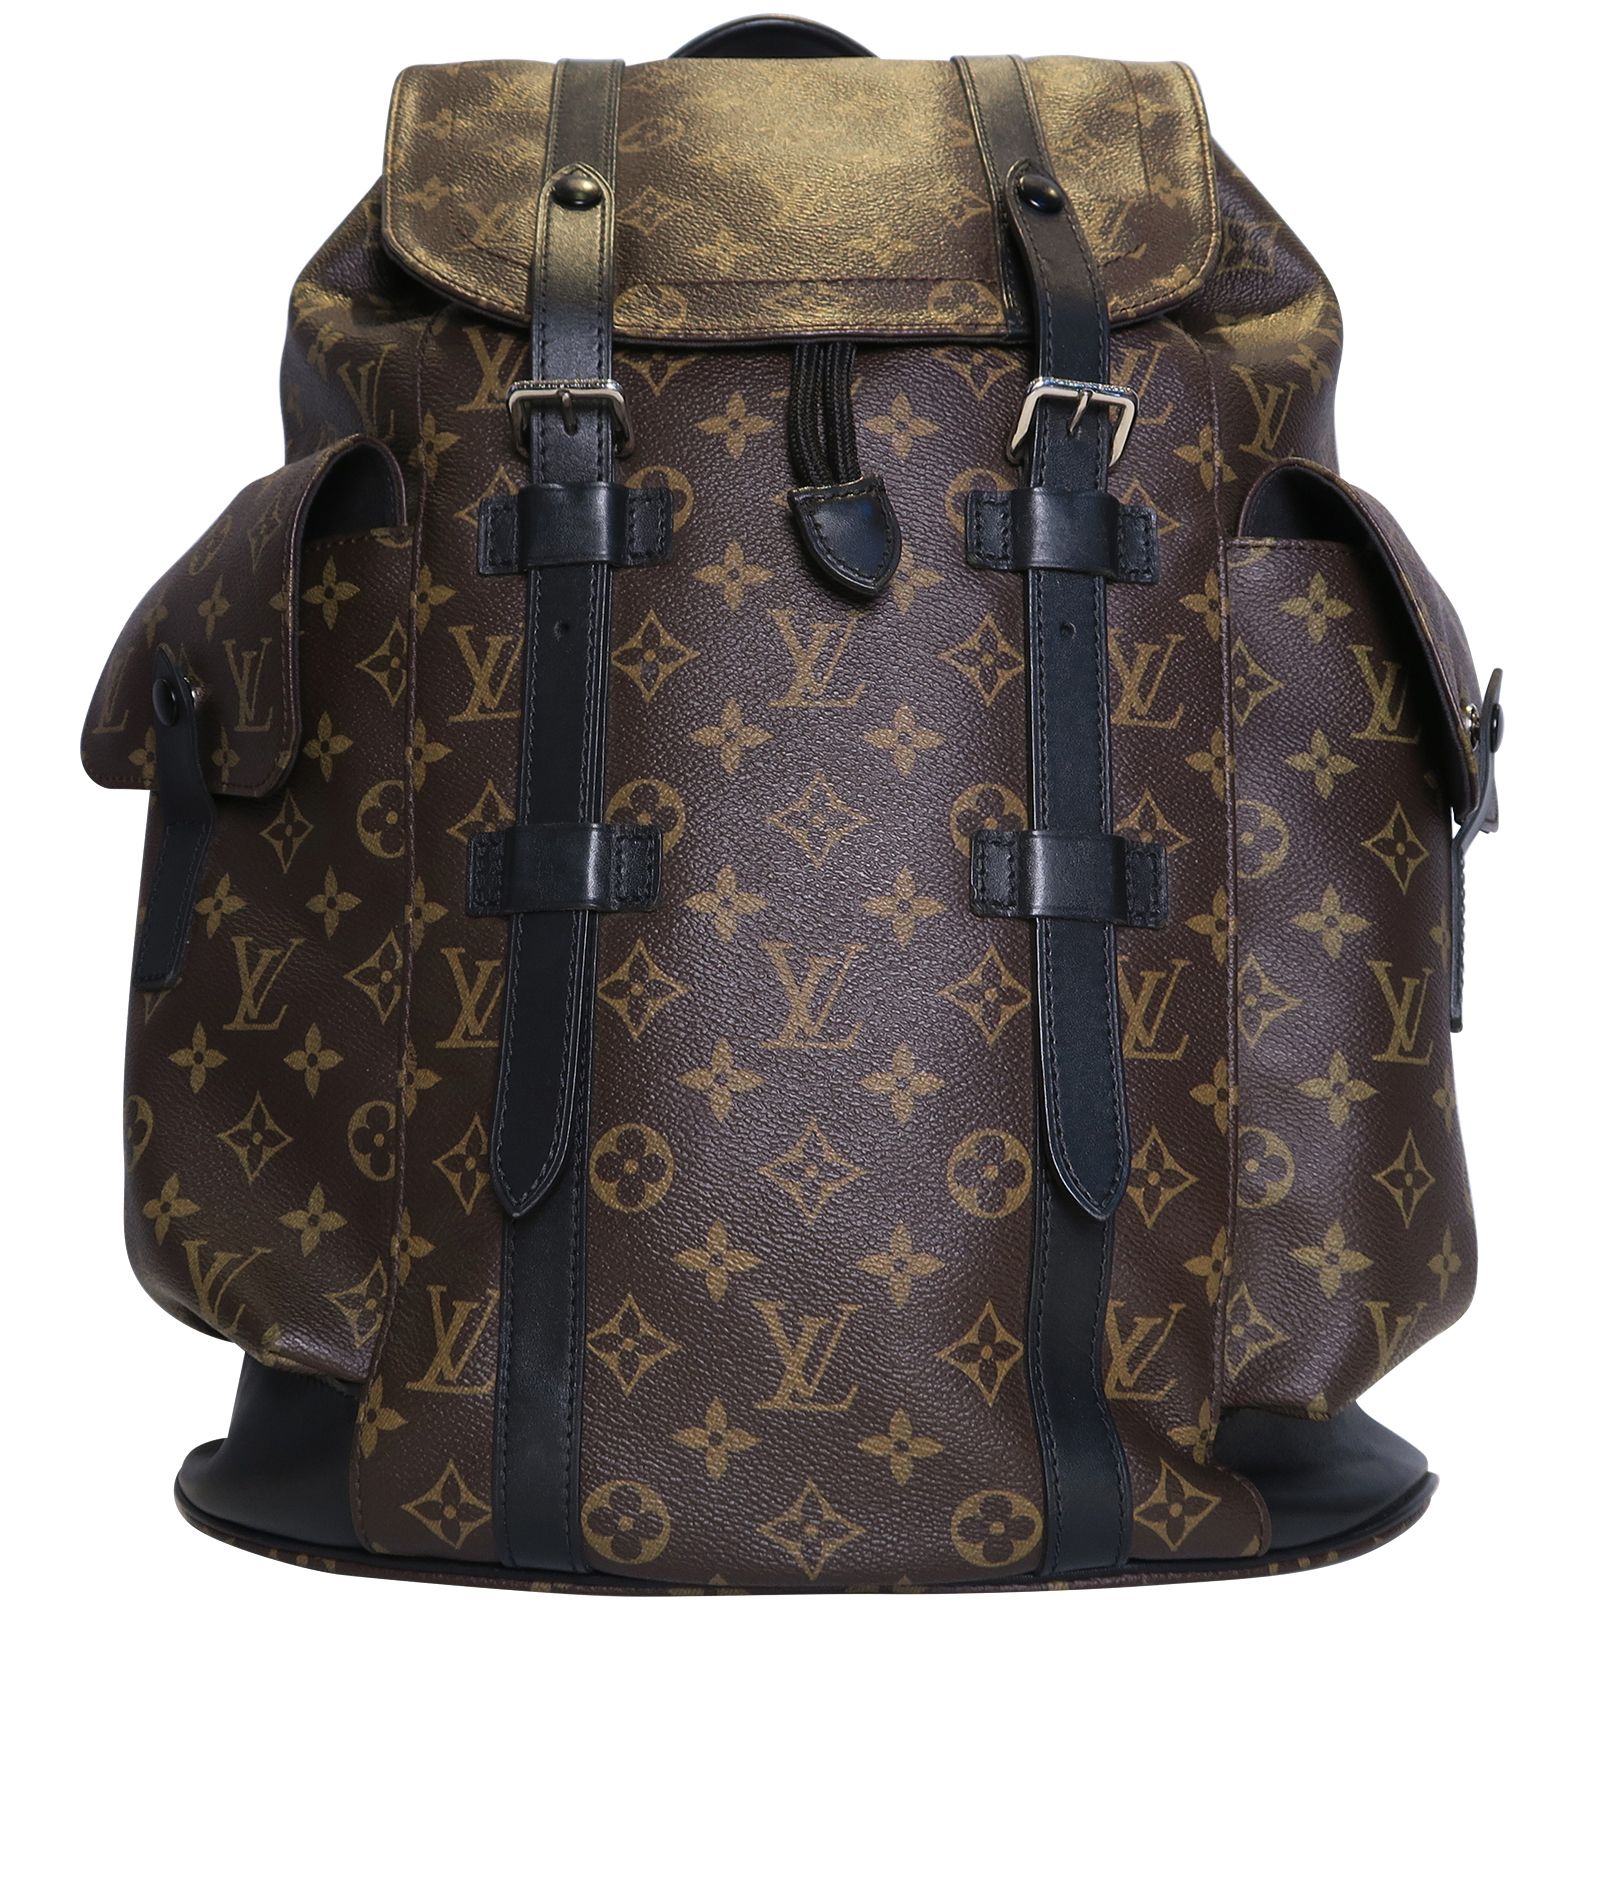 matchmaker grill hit Christopher MM Backpack, Louis Vuitton - Designer Exchange | Buy Sell  Exchange